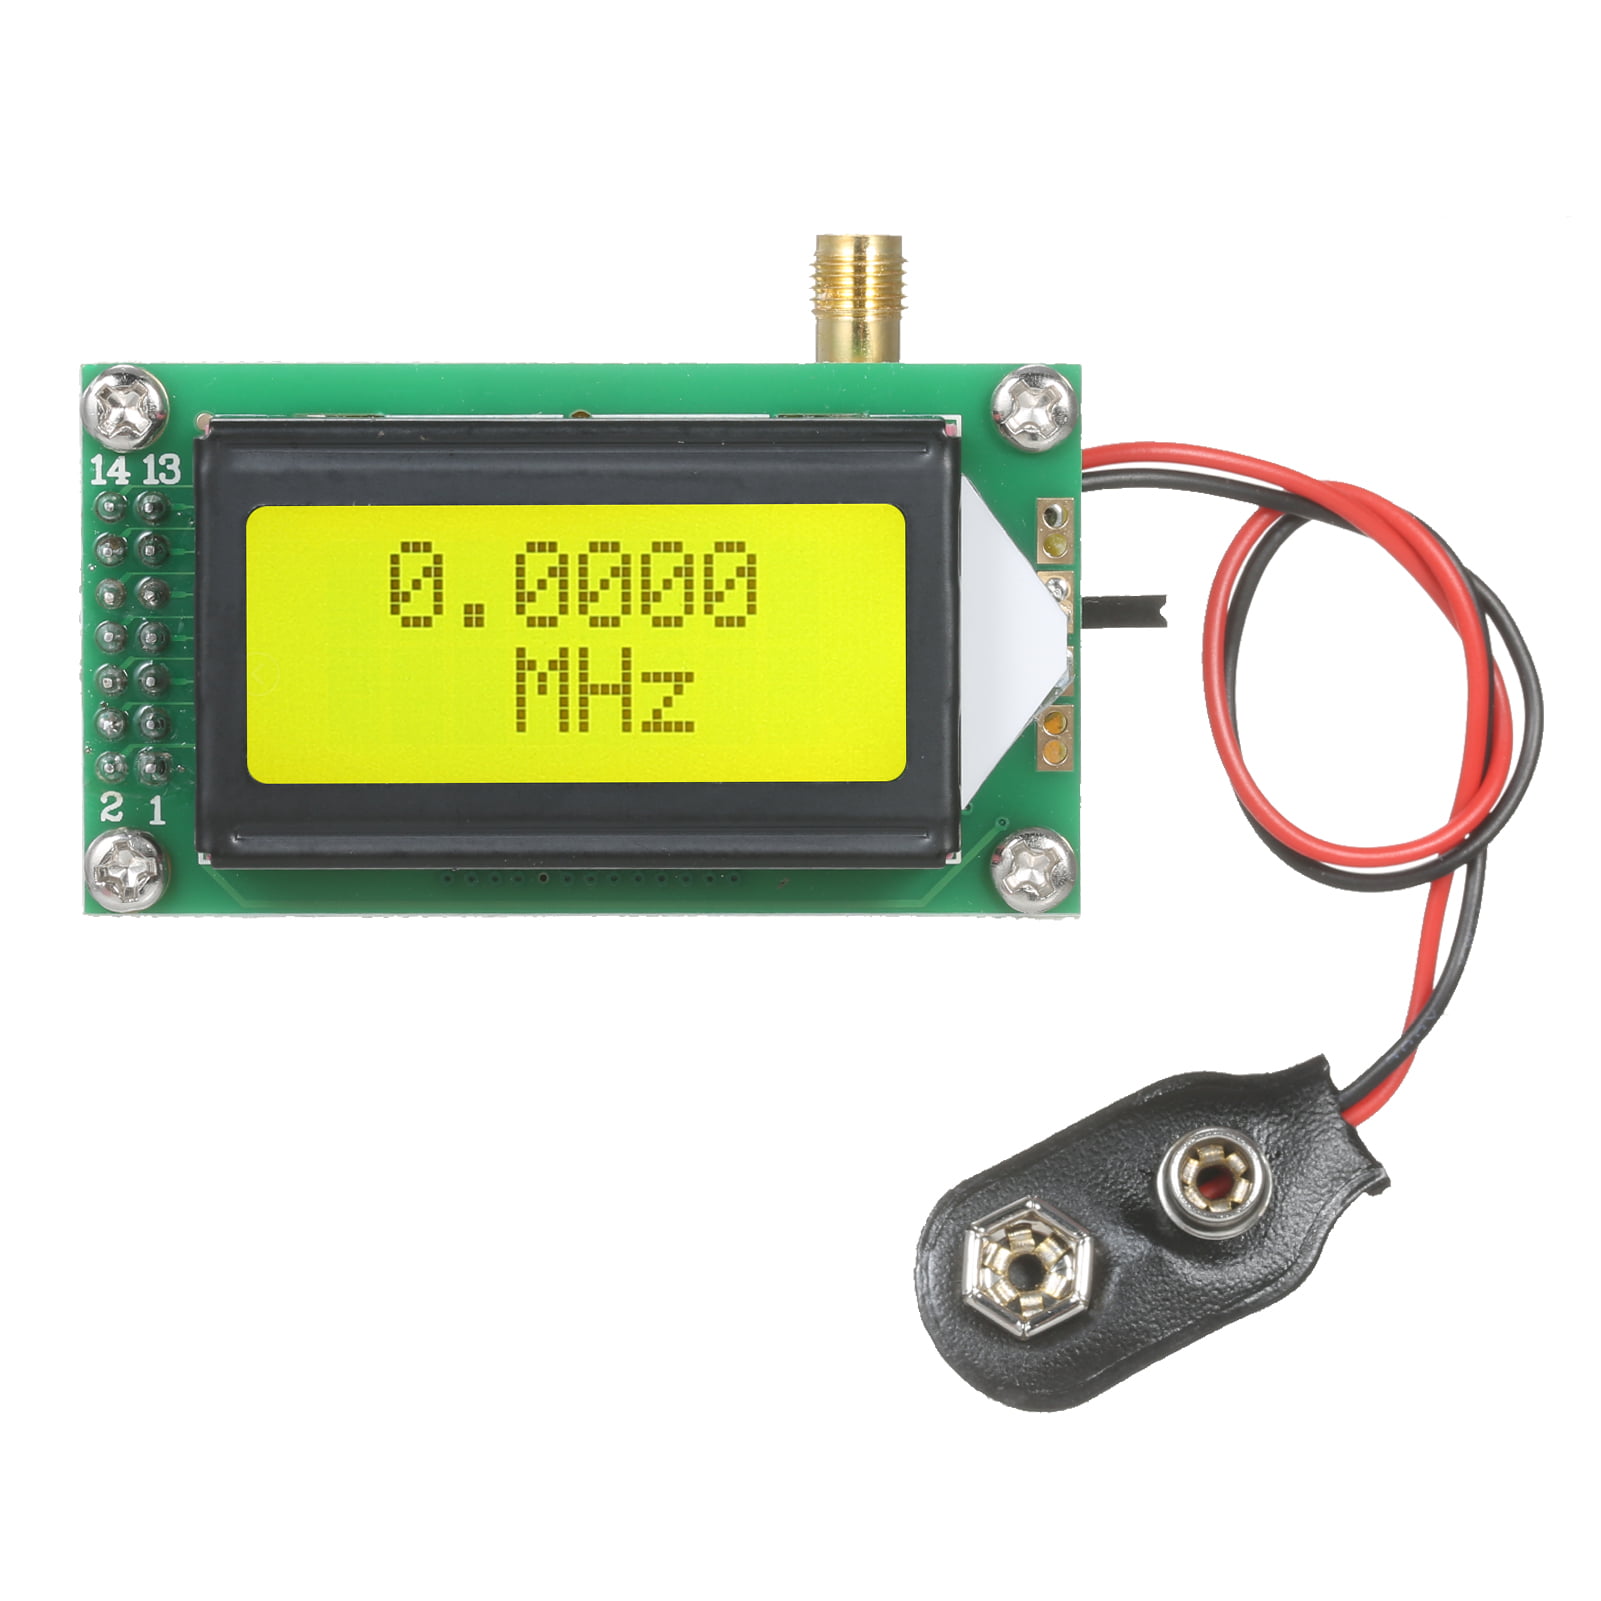 1MHz~1.1GHz  PLJ-0802-F LED Digital Display Frequency Counter Tester Module 